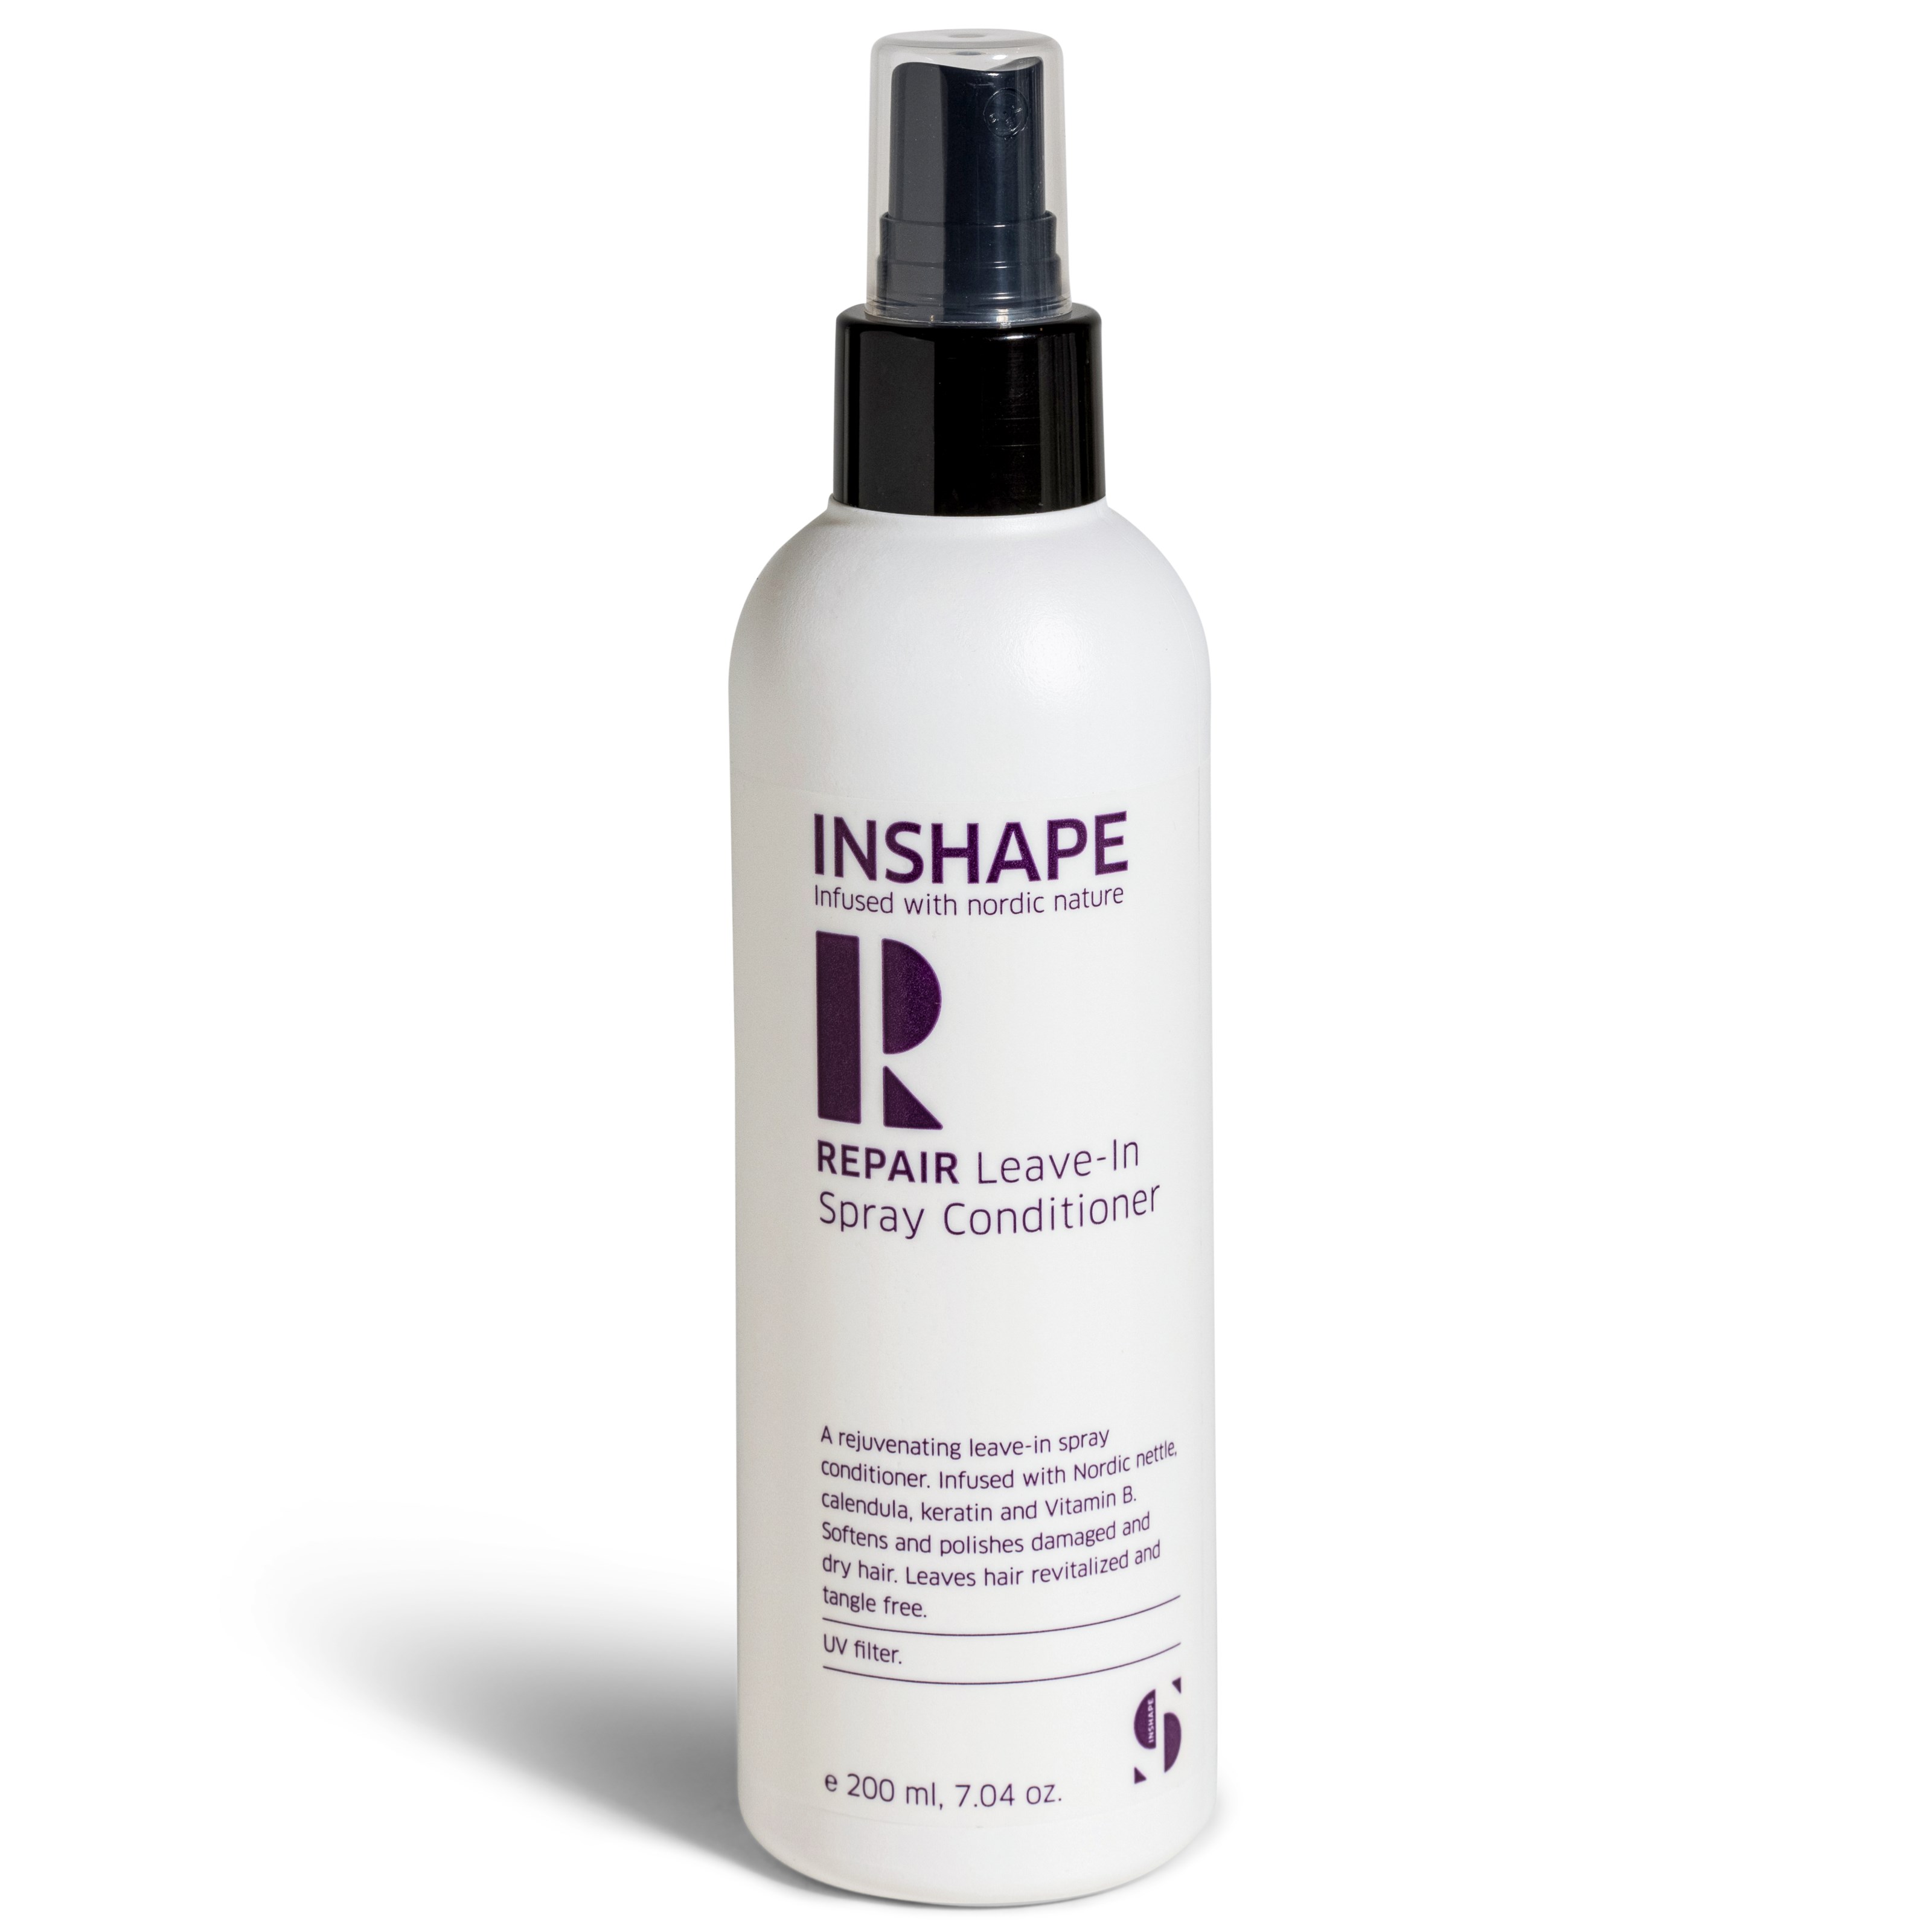 Läs mer om InShape Infused With Nordic Nature REPAIR Leave-In Spray Conditioner